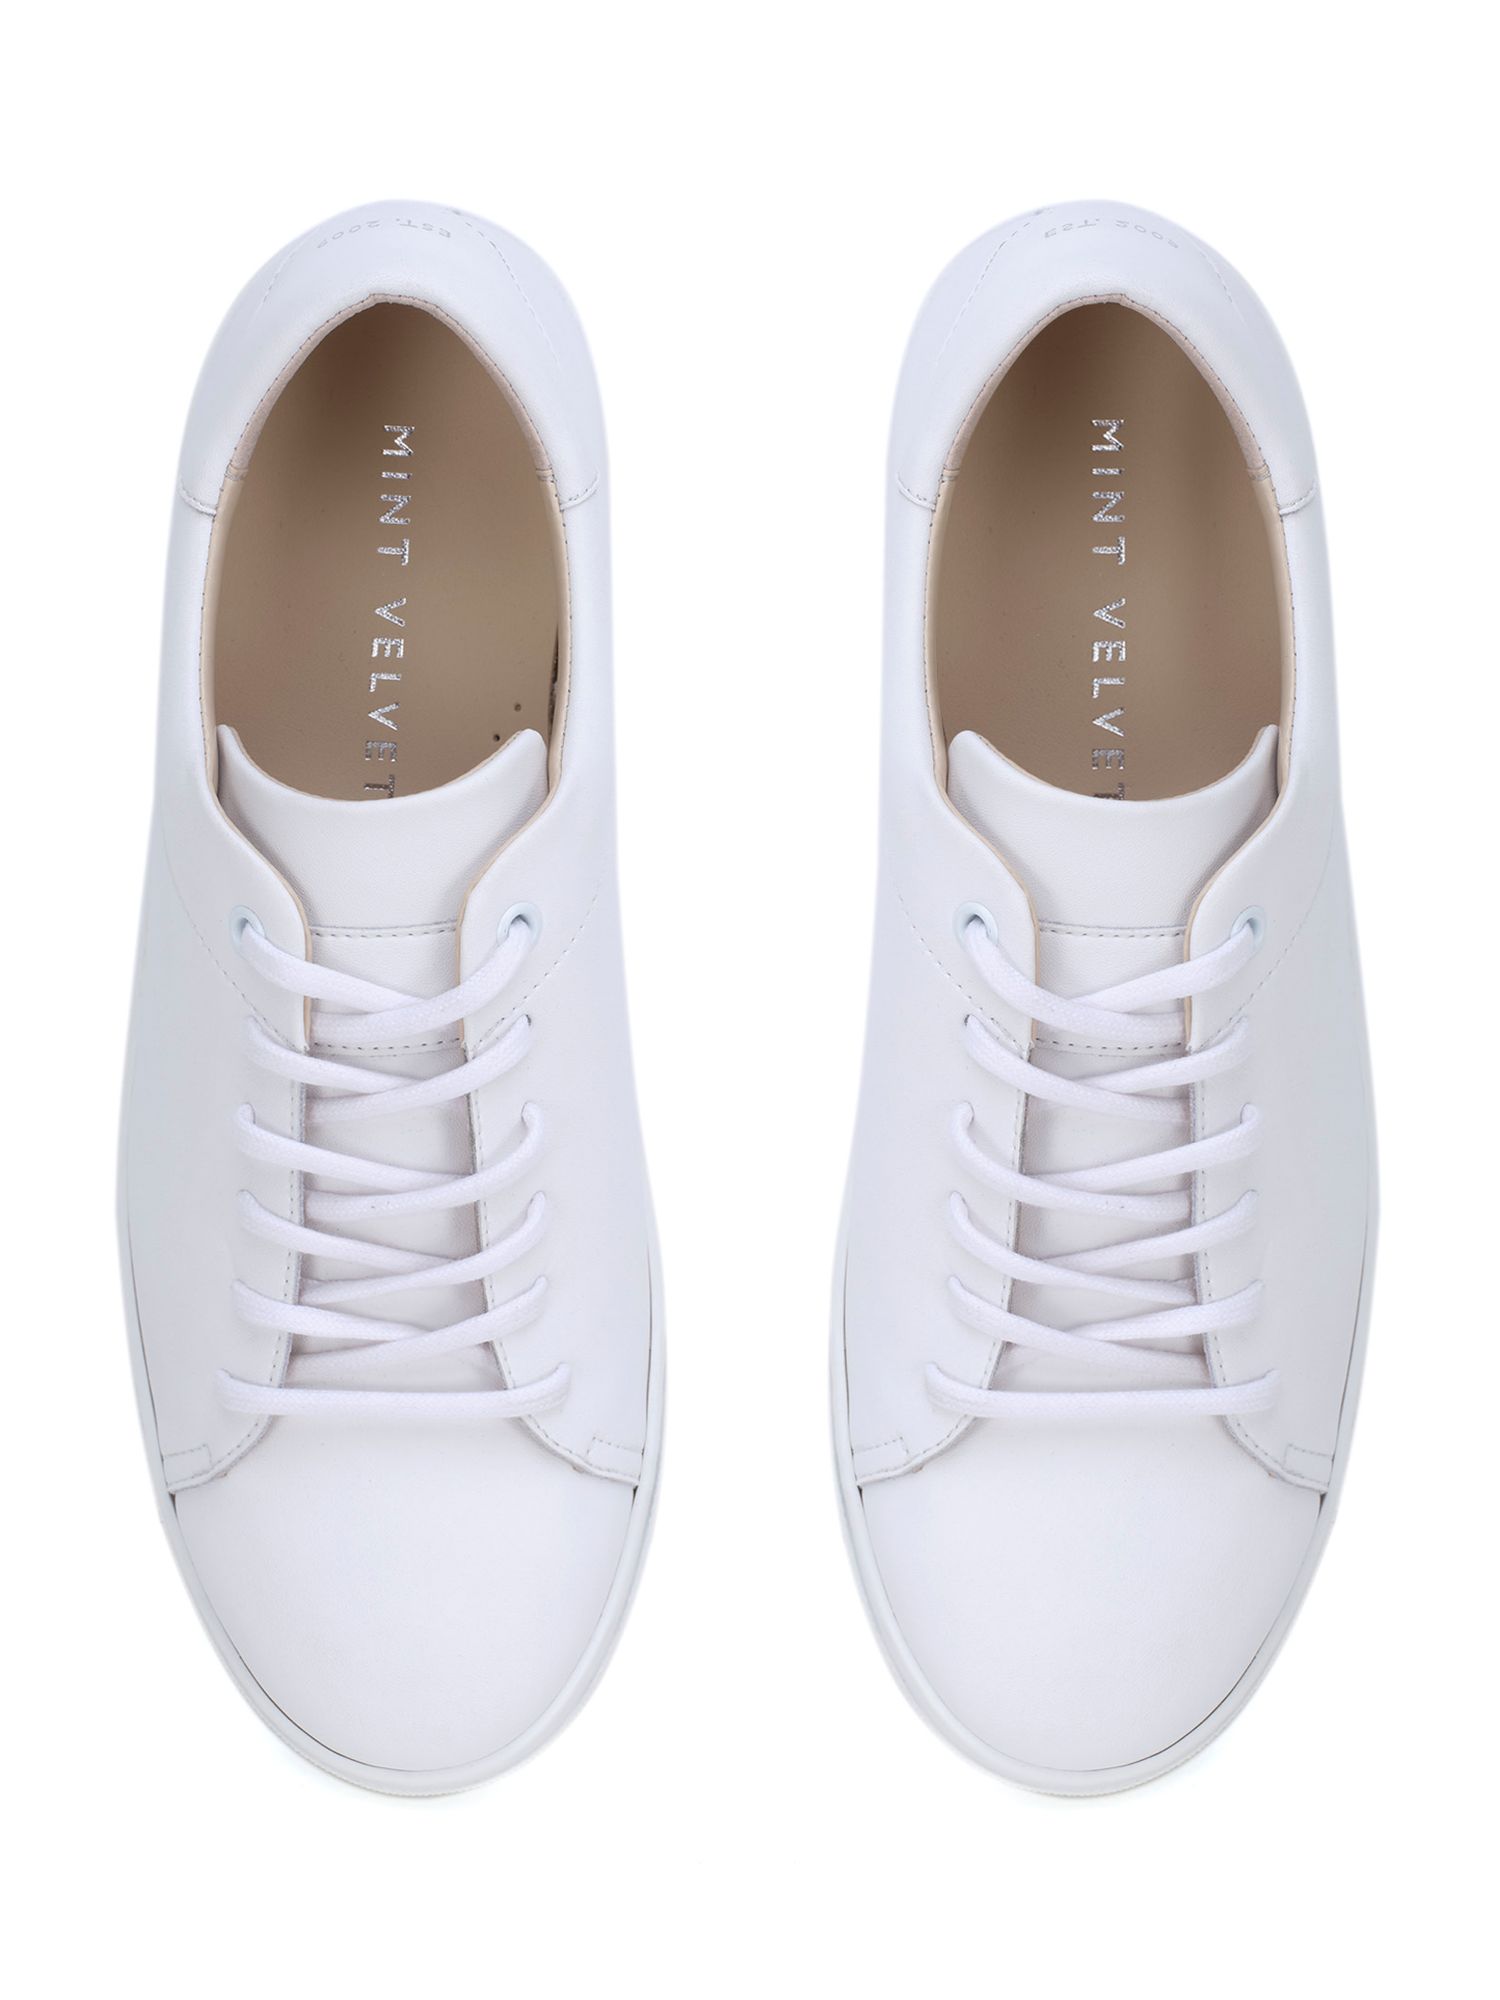 Mint Velvet Leather Trainers, White at John Lewis & Partners